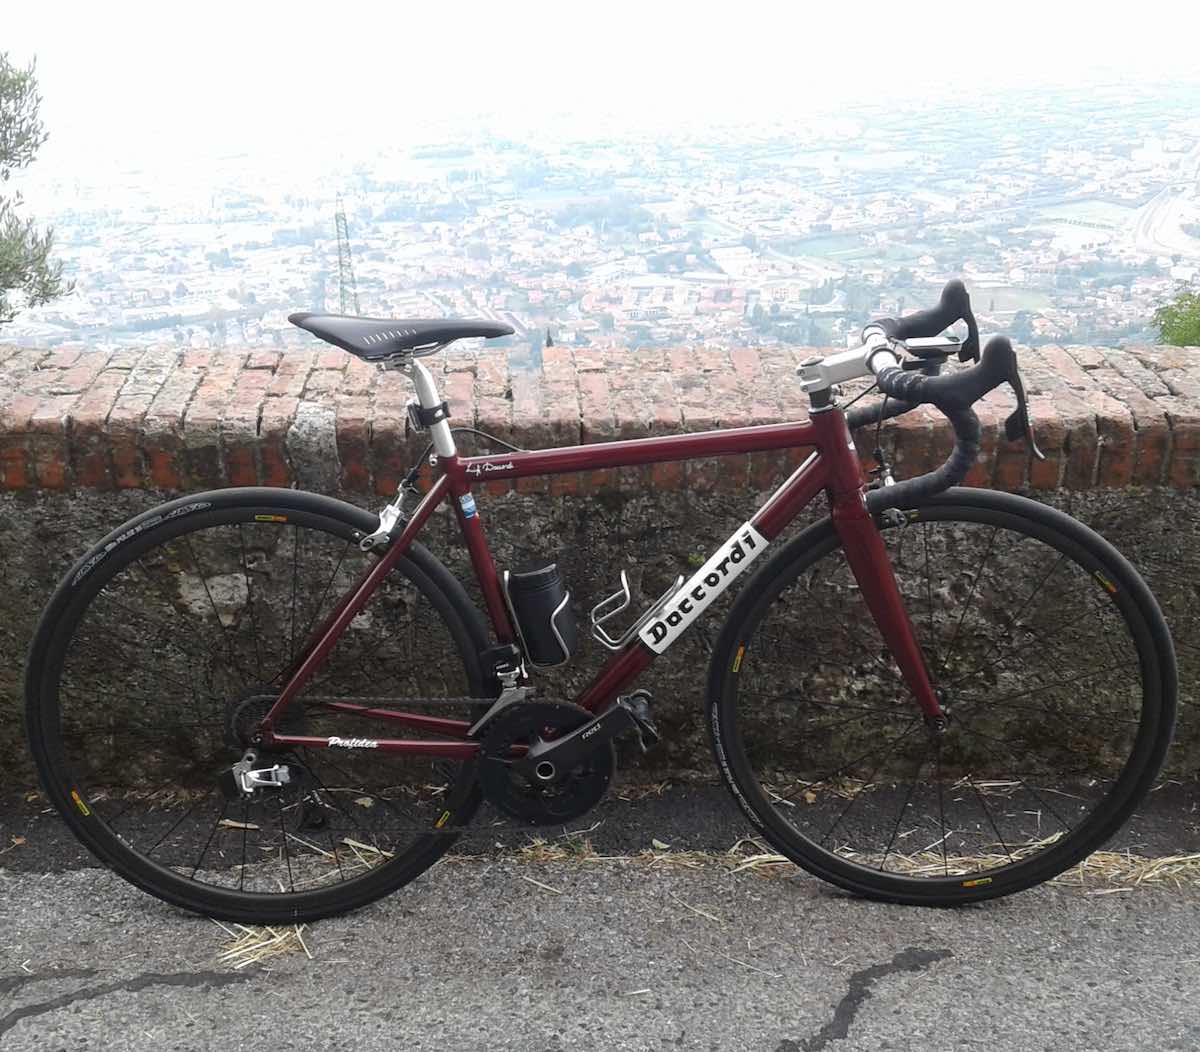 bikerumor pic of the day Daccordi Profidea bicycle with columbus steel fram photographed in Capriglia Pietrasanta of the tuscany region in italy.